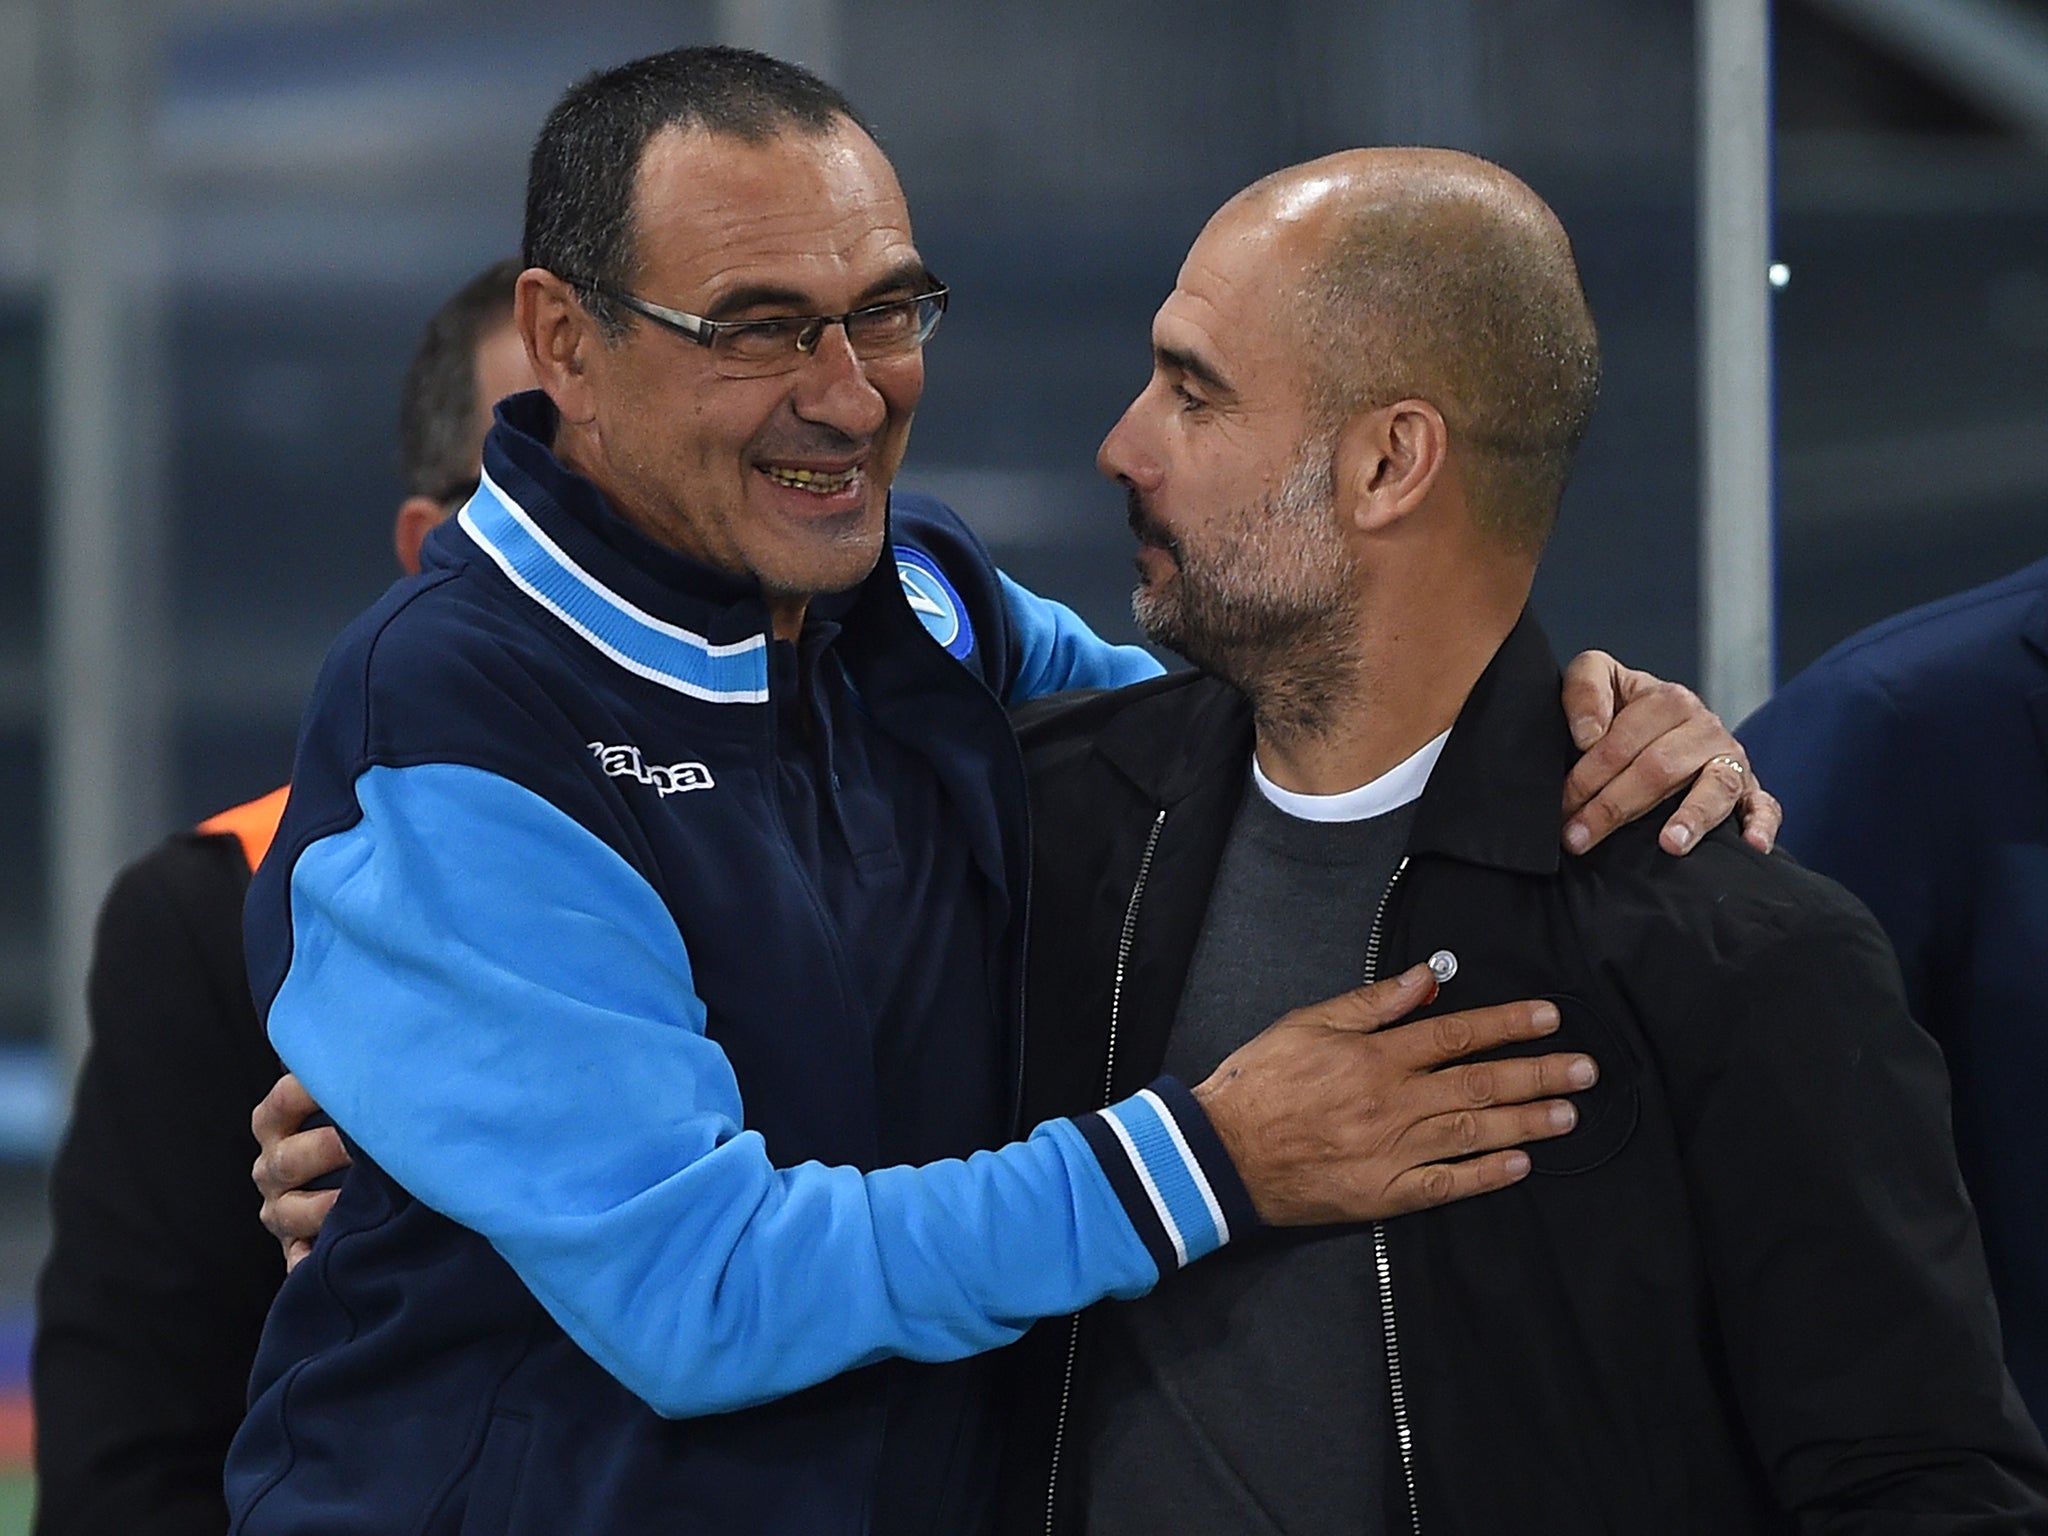 Maurizio Sarri and Pep Guardiola share a philosophy, one that could see Chelsea bridge the gap to Manchester City